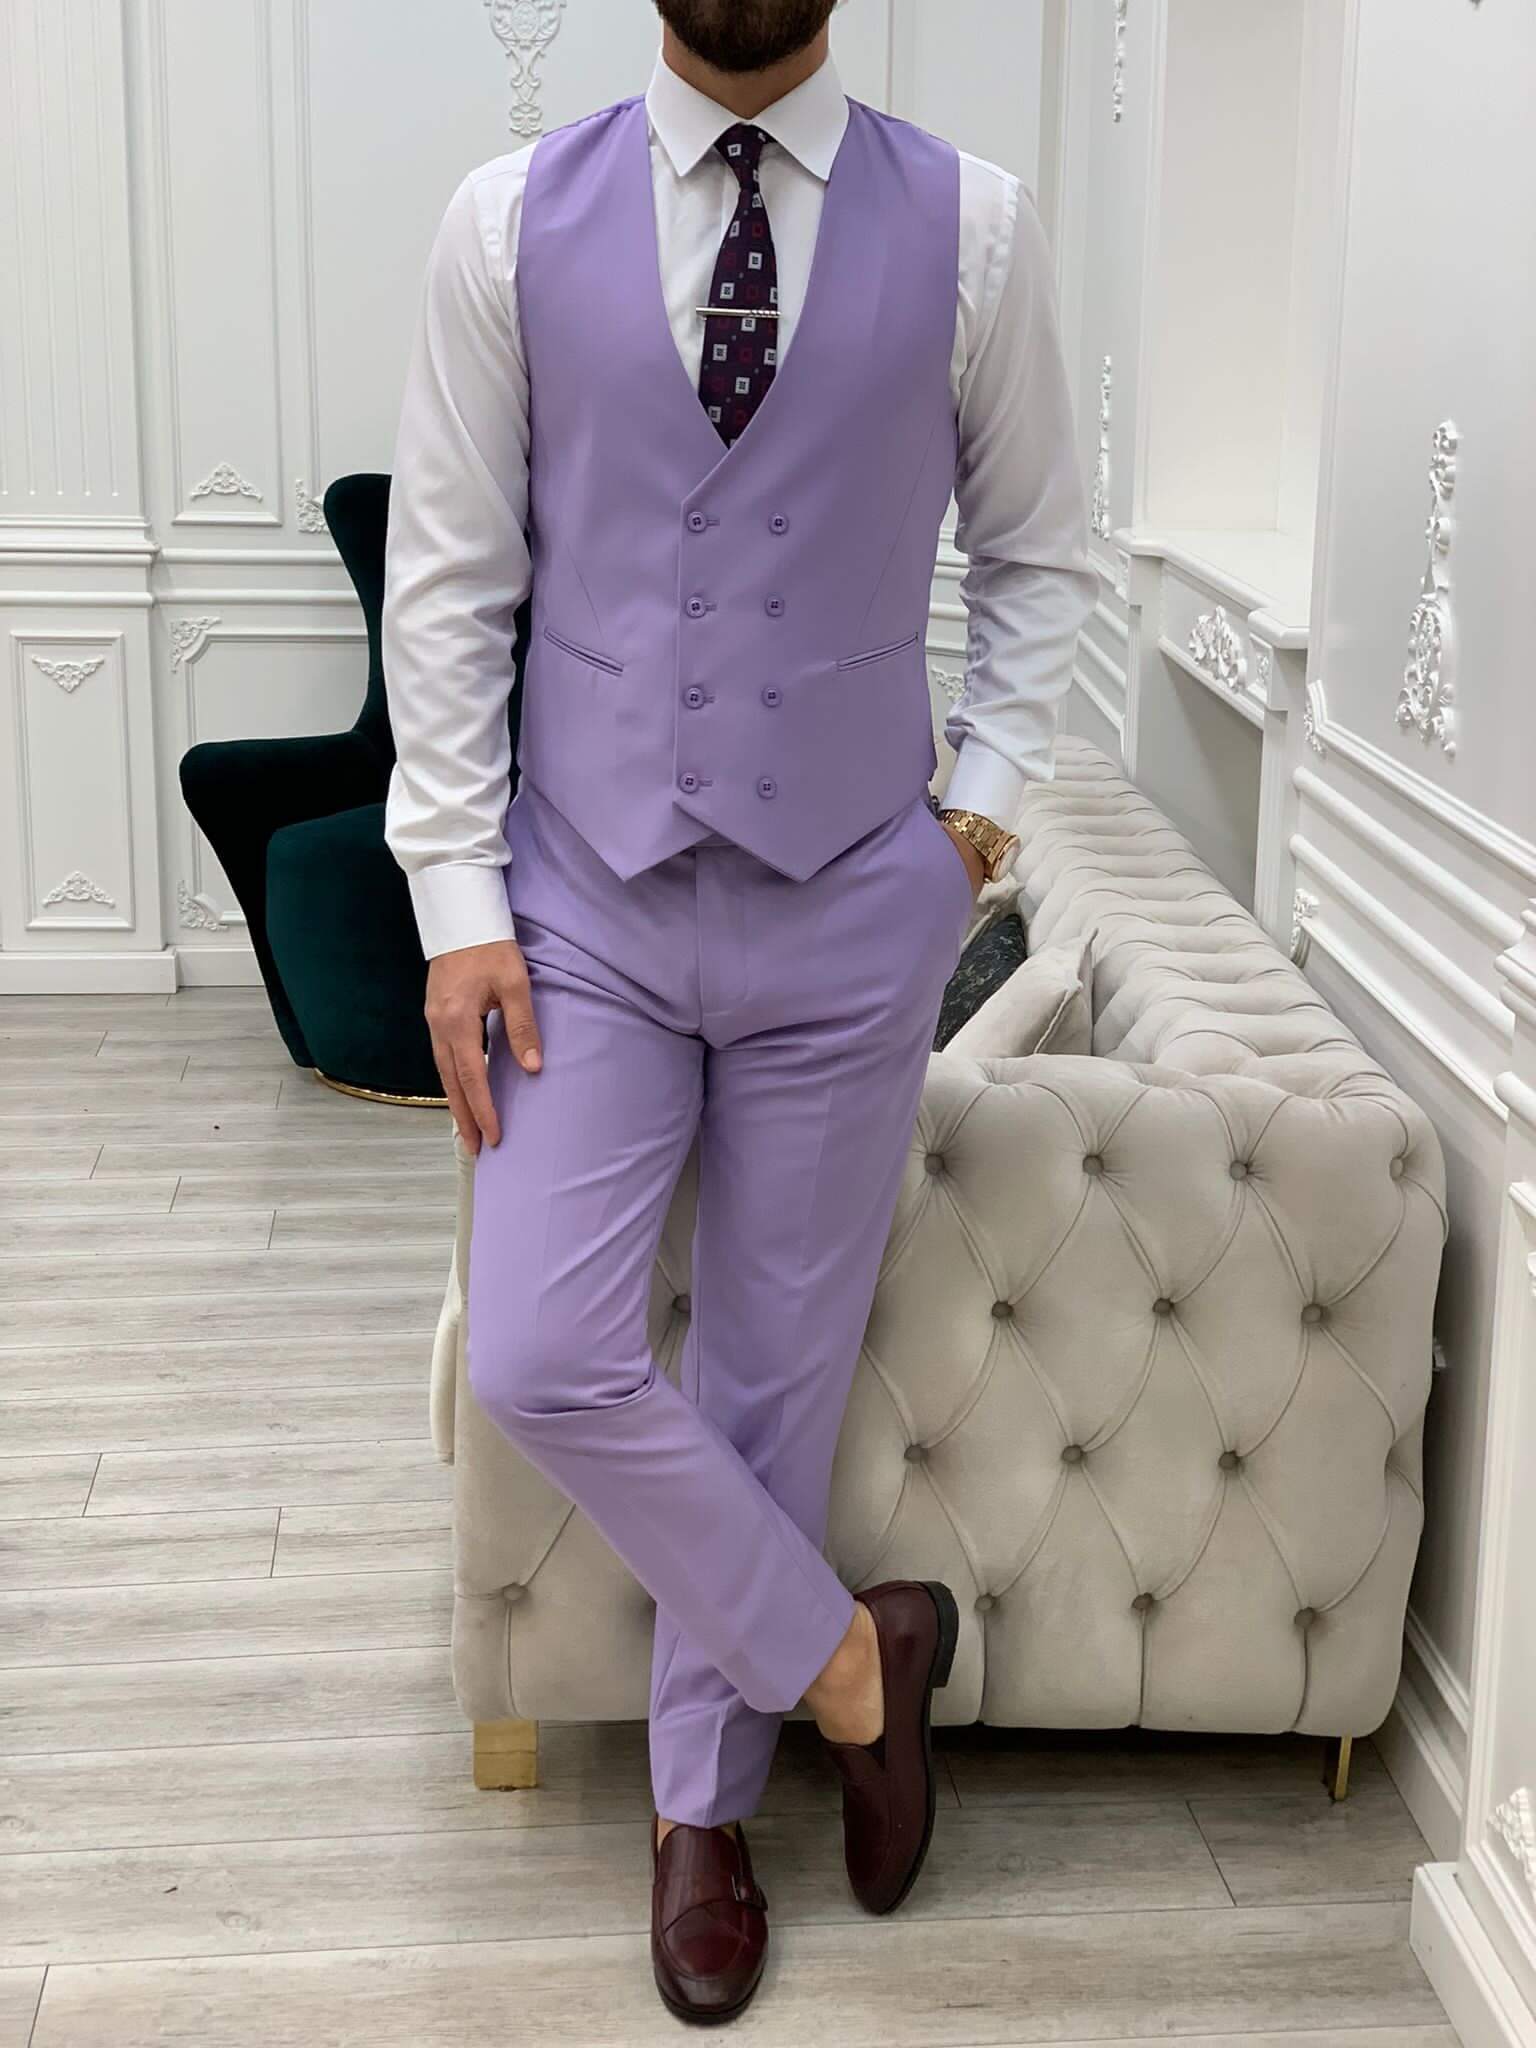 Model confidently showcasing HolloMen's Purple Slim Fit Suit, accentuating its sleek design and vibrant color.